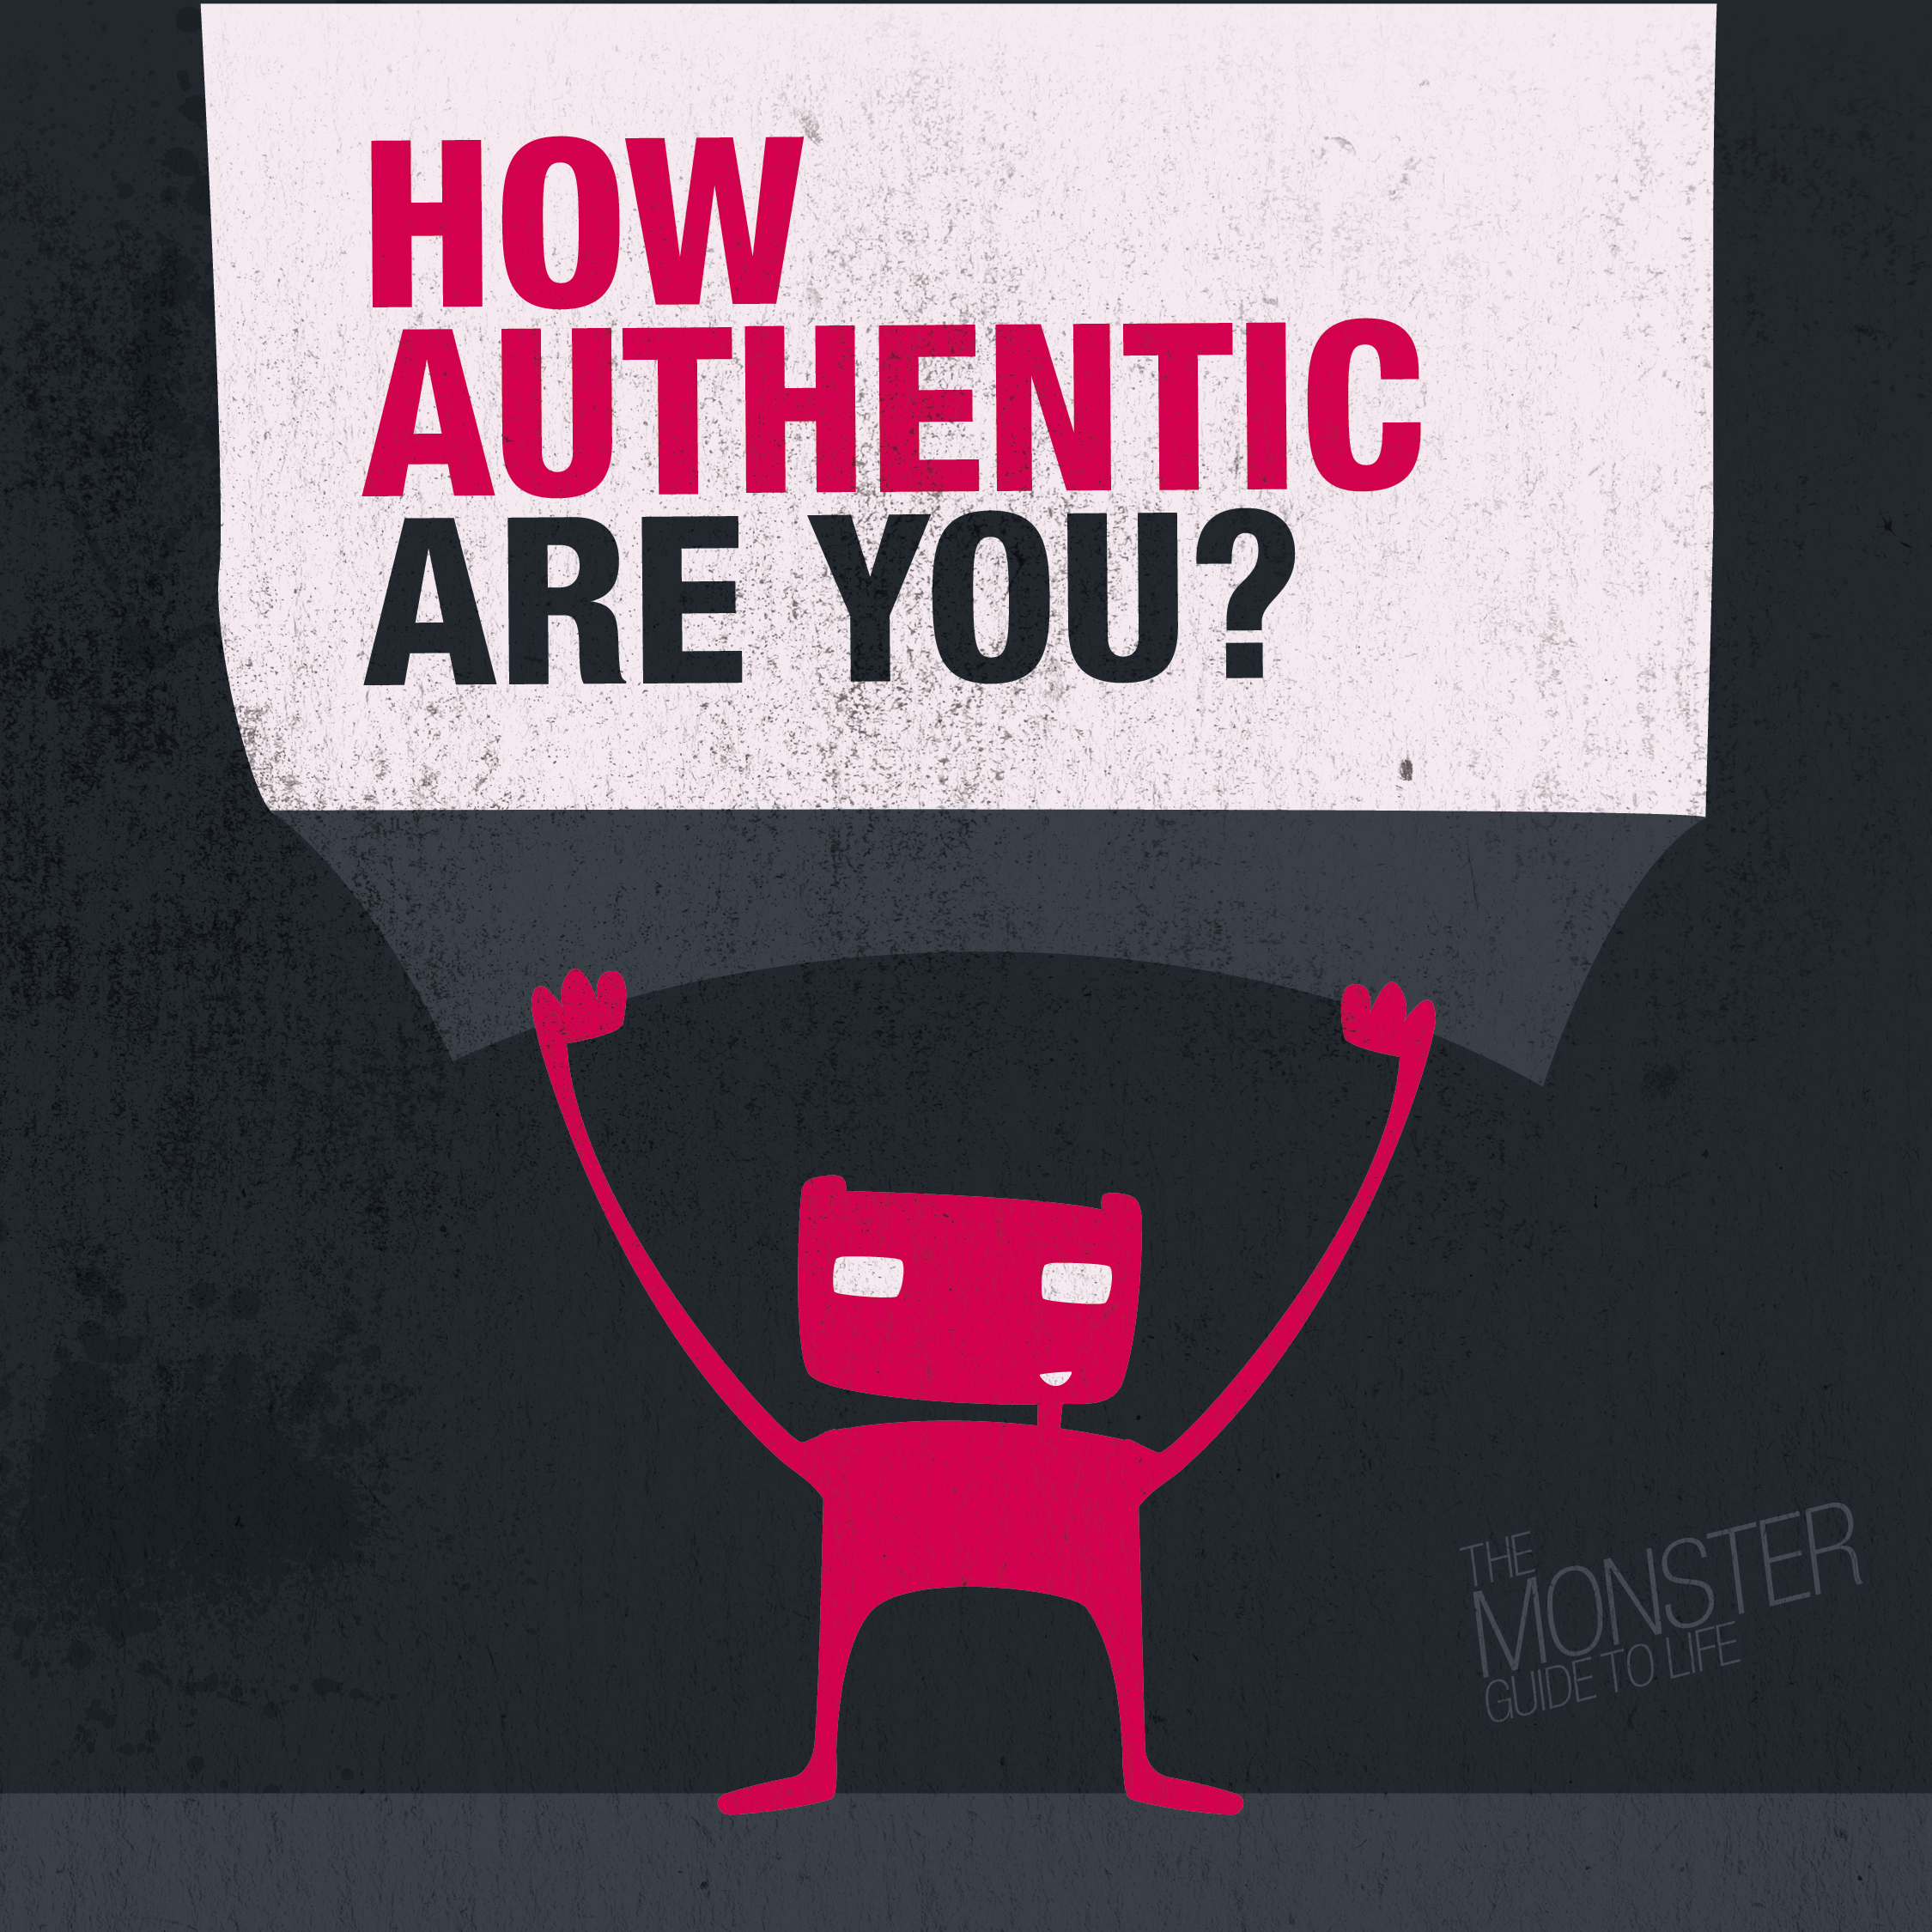 How authentic are you?